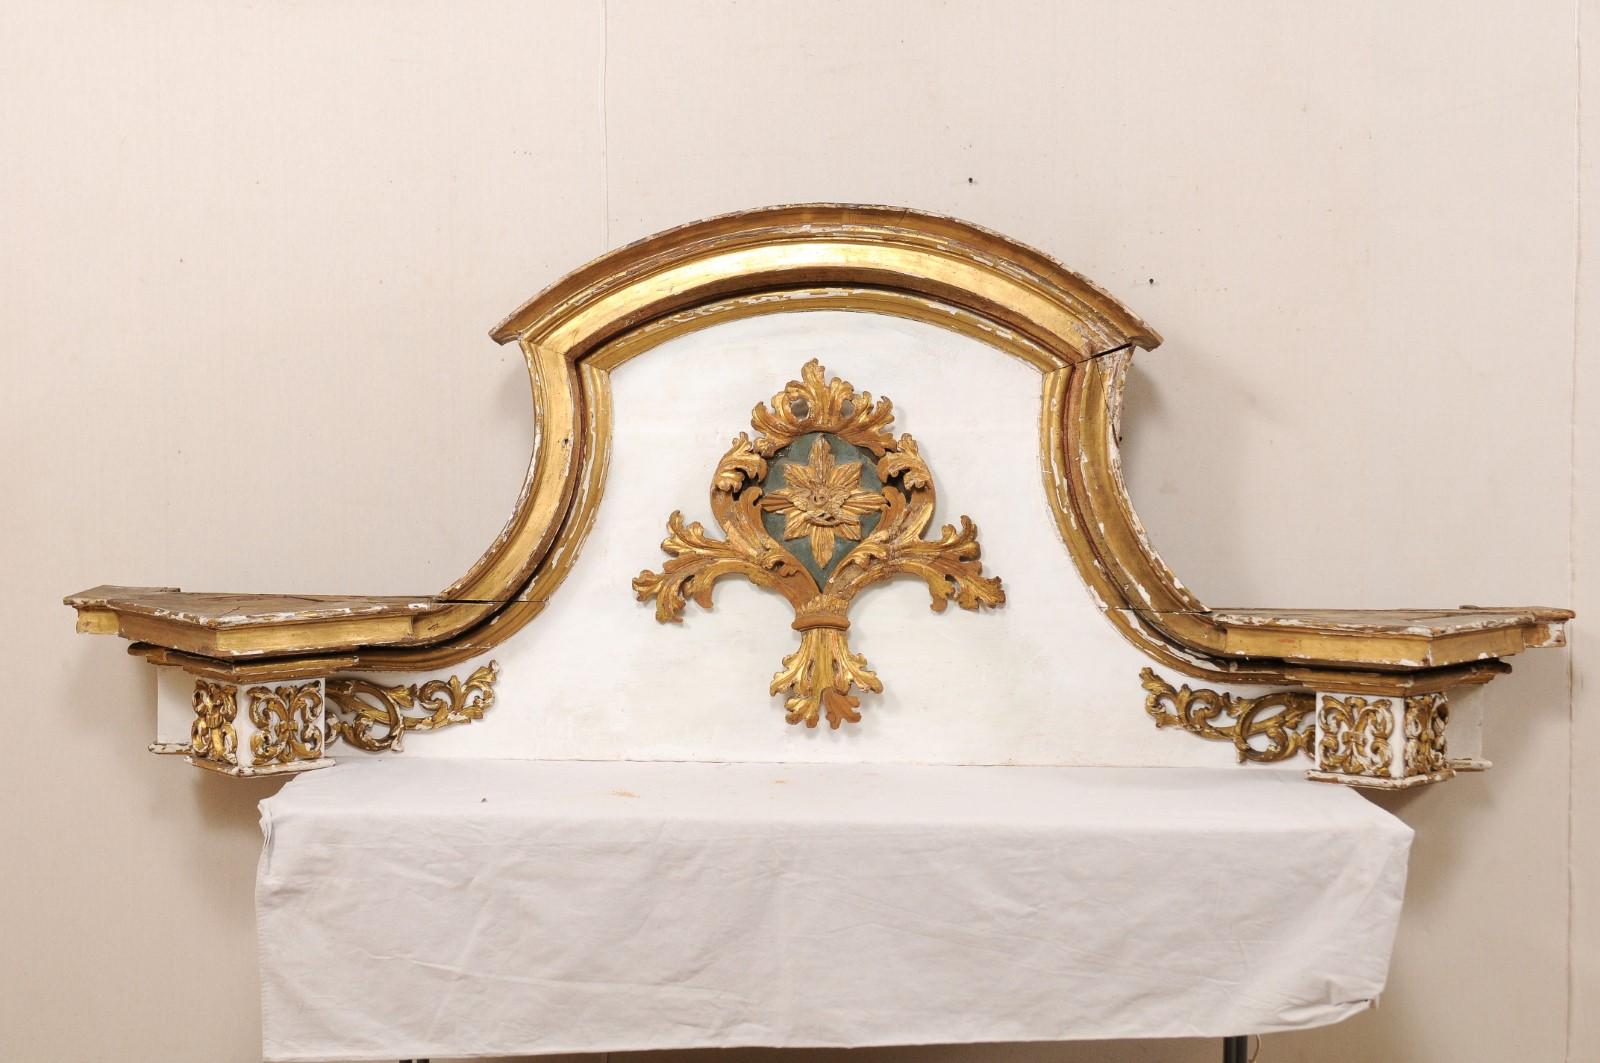 An Italian 18th century grand-scale gilded and painted wood pediment fragment. This antique architectural fragment from Italy has a greatly spanning width of over 8.75 feet, with a height at center of over 3 feet tall. There is a heavily molded